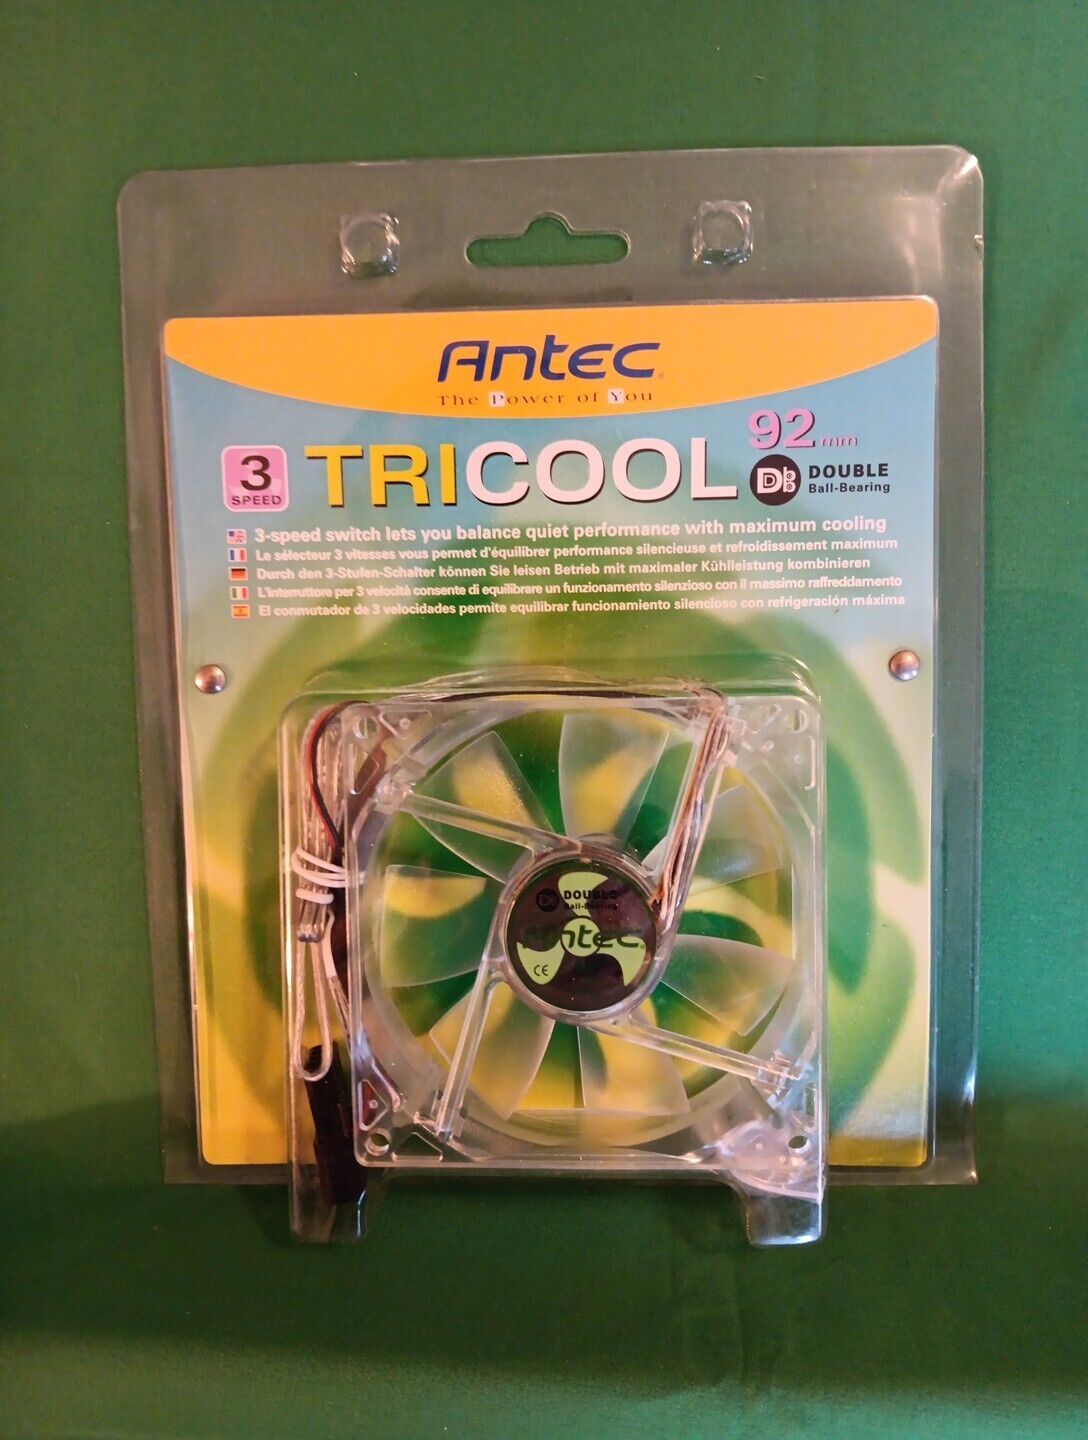 Antec Tricool Fan 92mm 3 Speed Double Ball-Bearing NEW